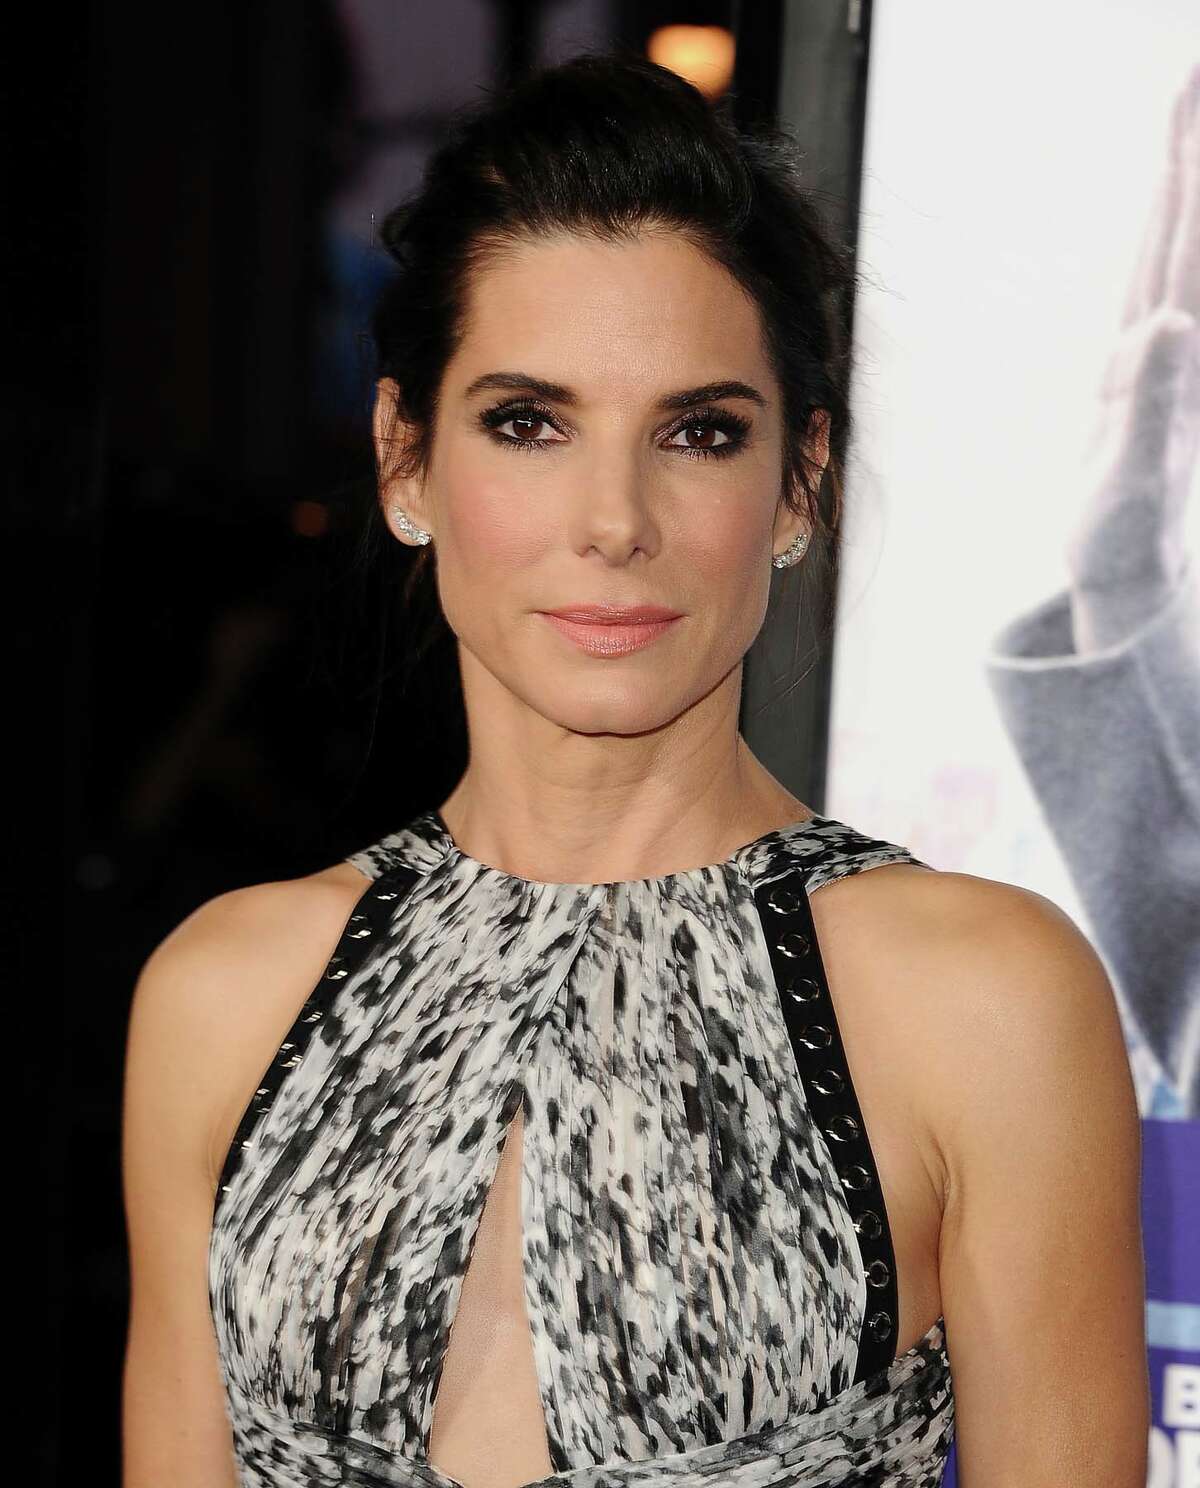 Sandra Bullock will play former state Sen. Wendy Davis in a possible upcoming film called Let Her Speak, about Davis' 13-hour filibuster to block the vote of an anti-abortion bill during the final hours of a 2013 special session of the Texas Legislature.